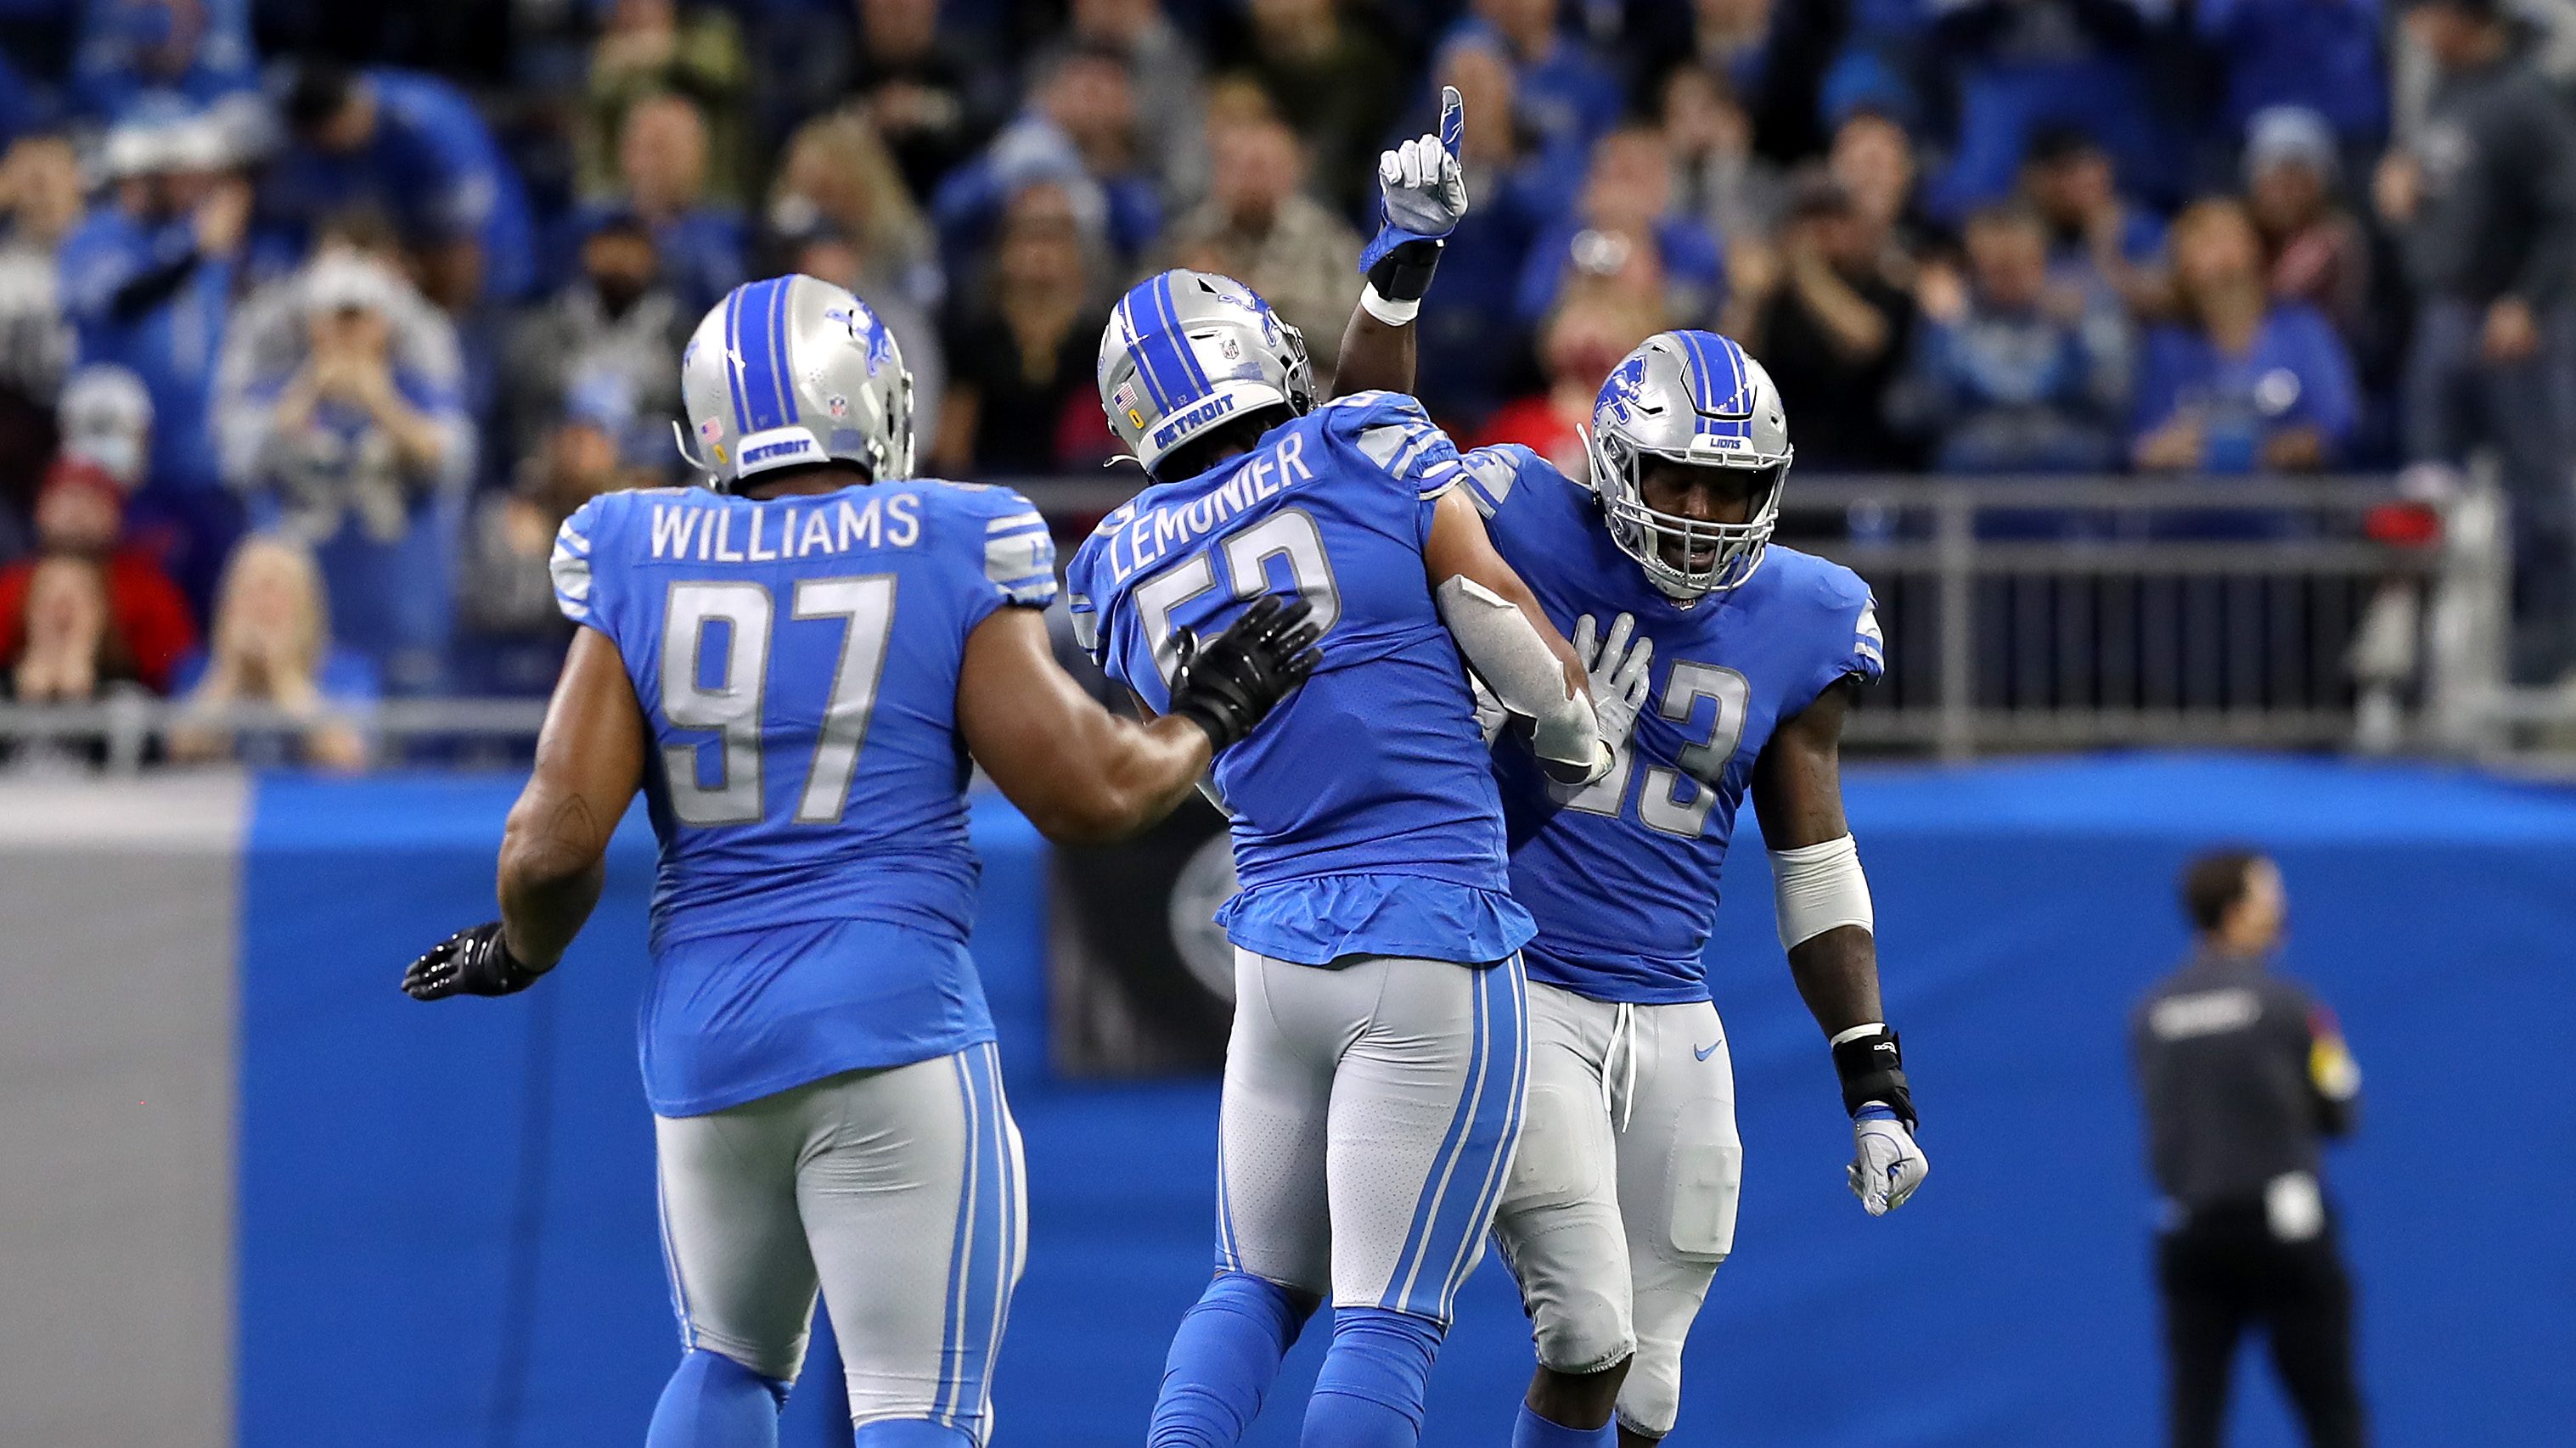 Lions Share Epic Week 15 Post-Victory Celebration Video Heavy